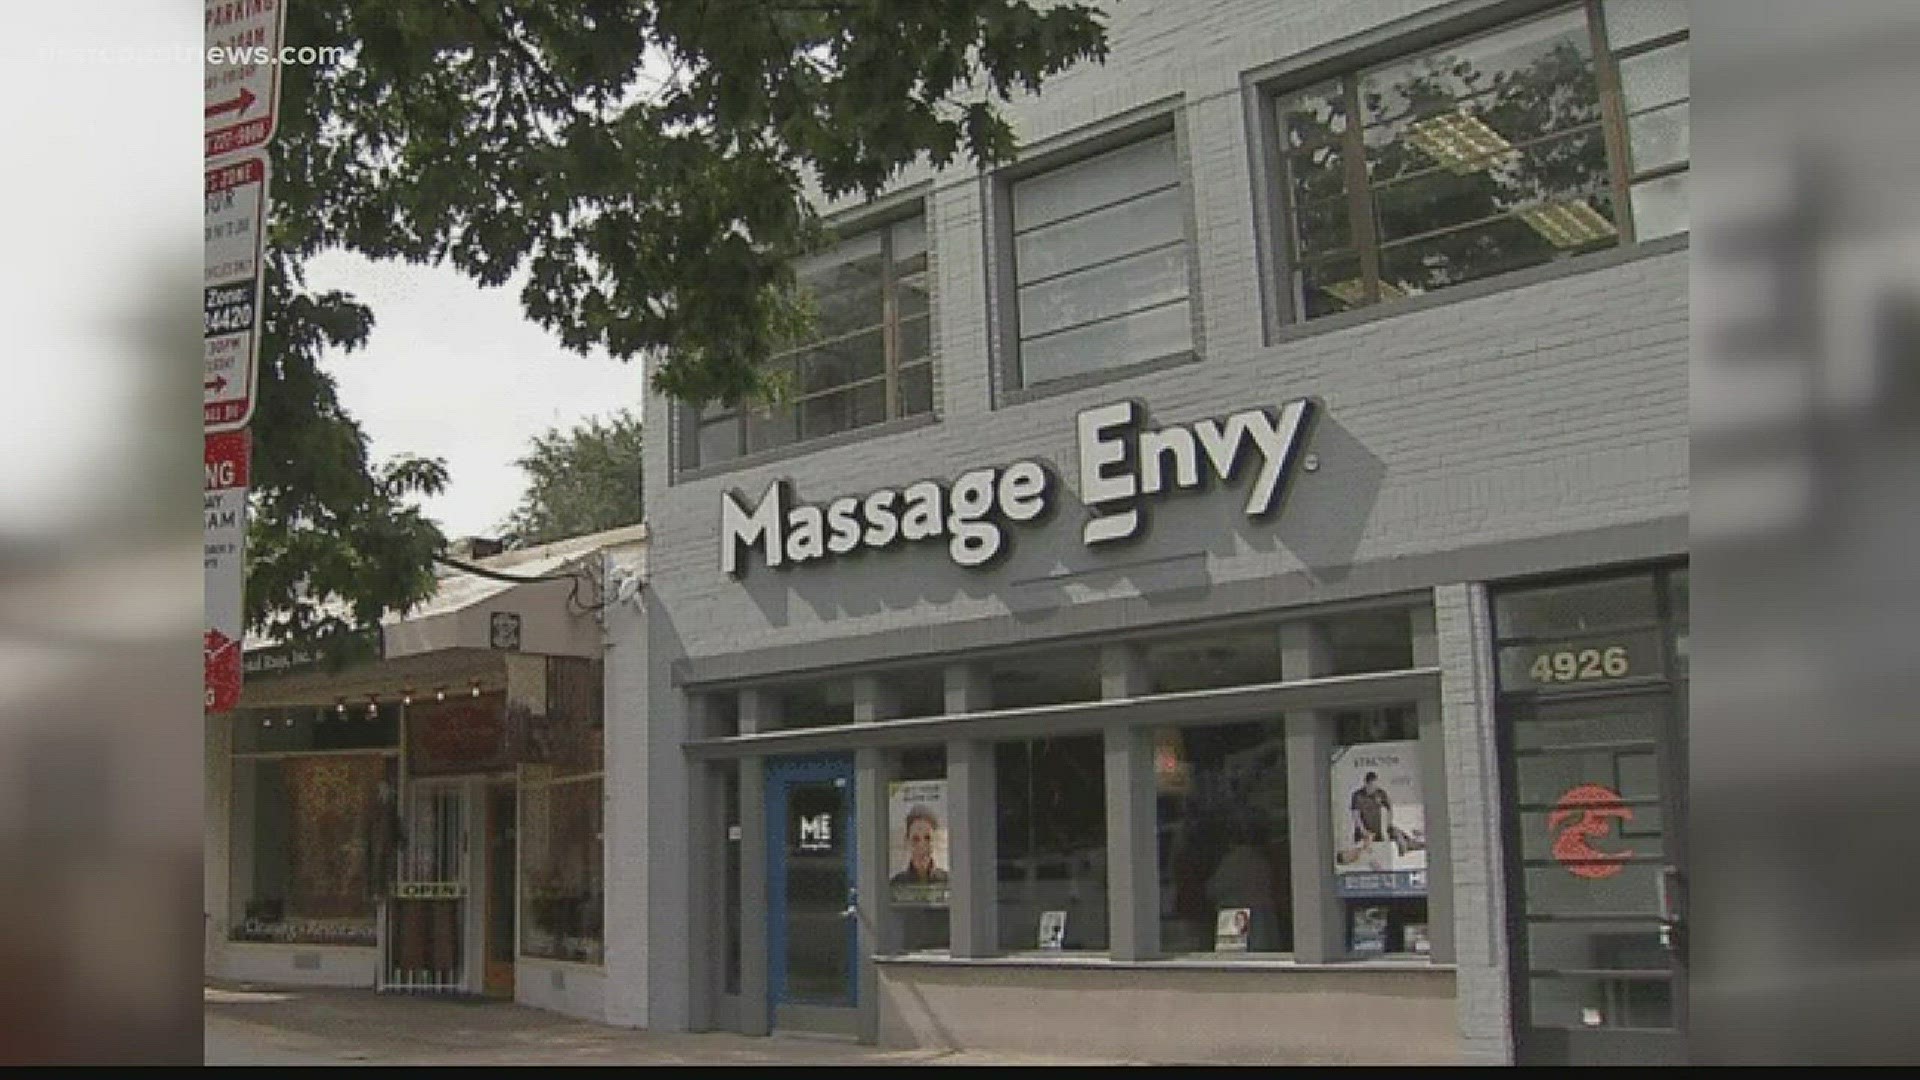 The company is facing nearly 200 allegations of sexual assault. Locally, there are six locations, but only 1 online complaint.